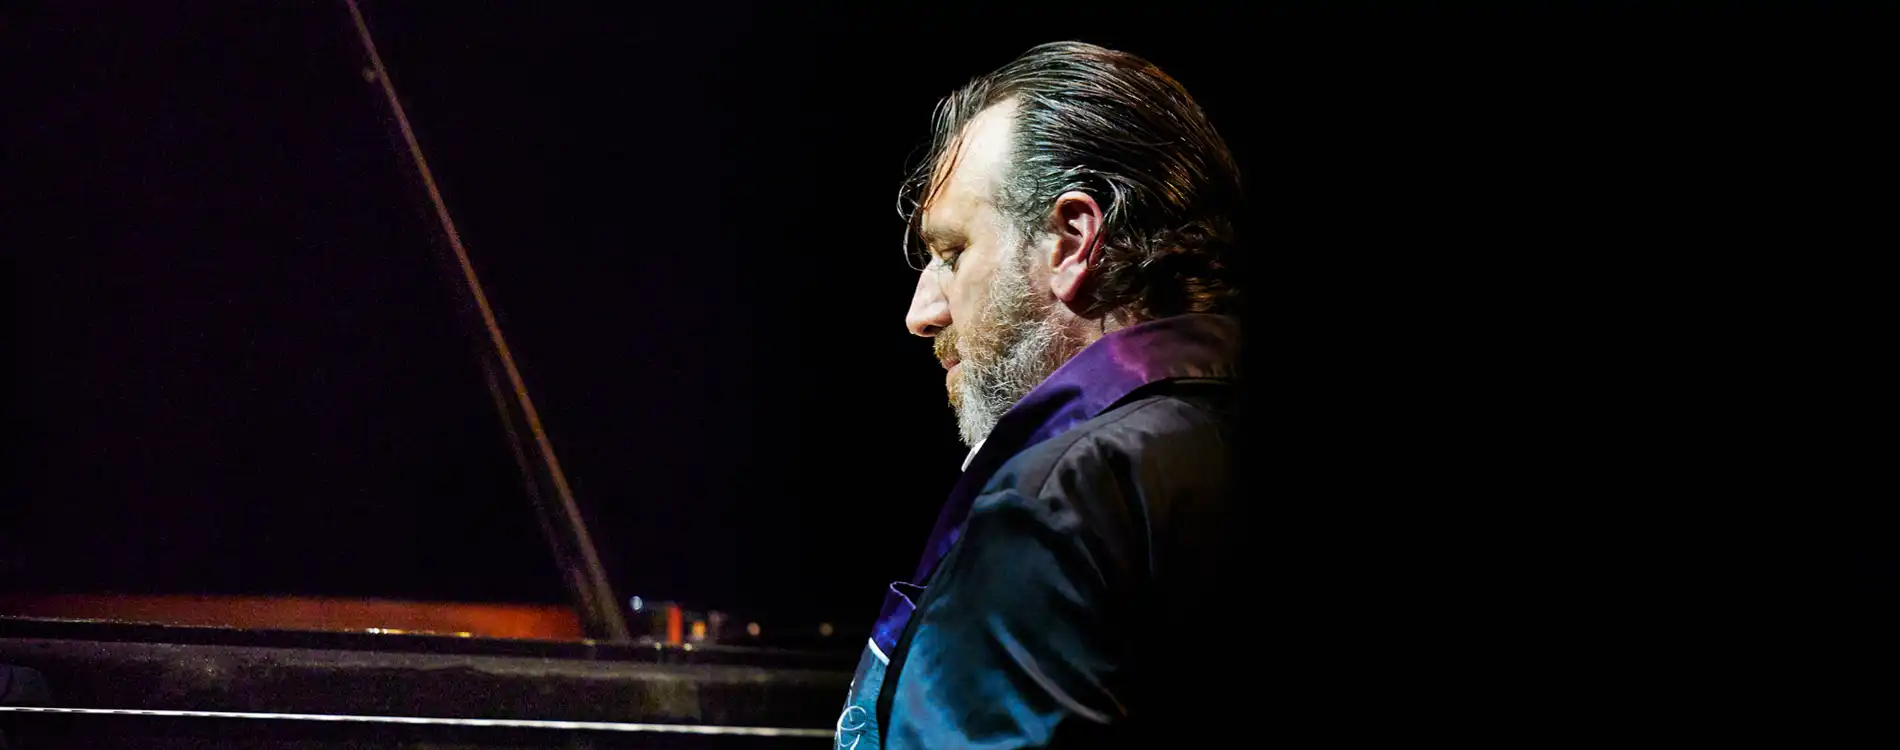 mcjf-Chilly-Gonzales-Header